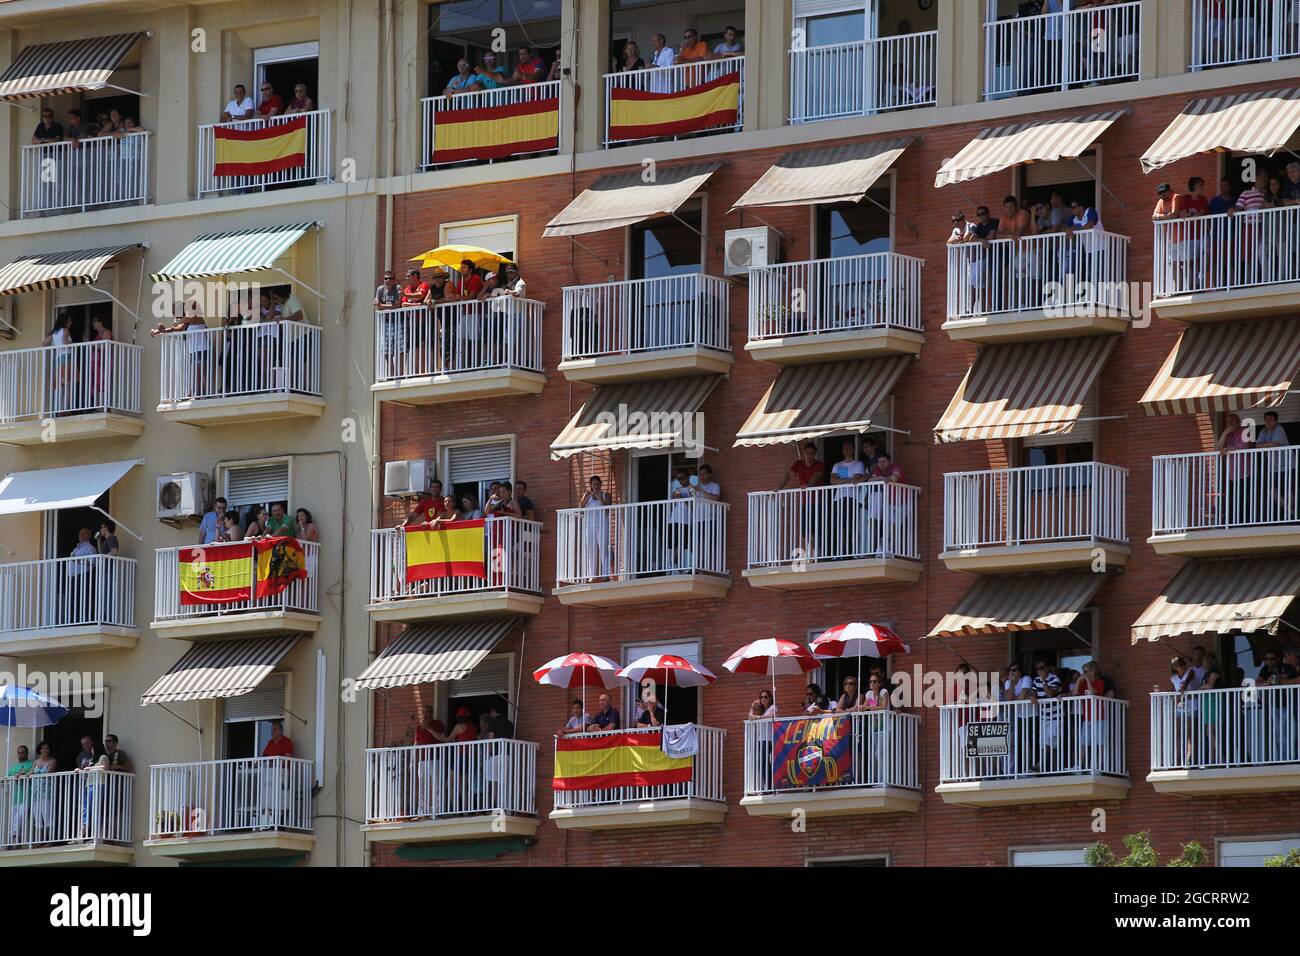 Fans in the surrounding buildings. European Grand Prix, Sunday 24th June 2012. Valencia, Spain. Stock Photo